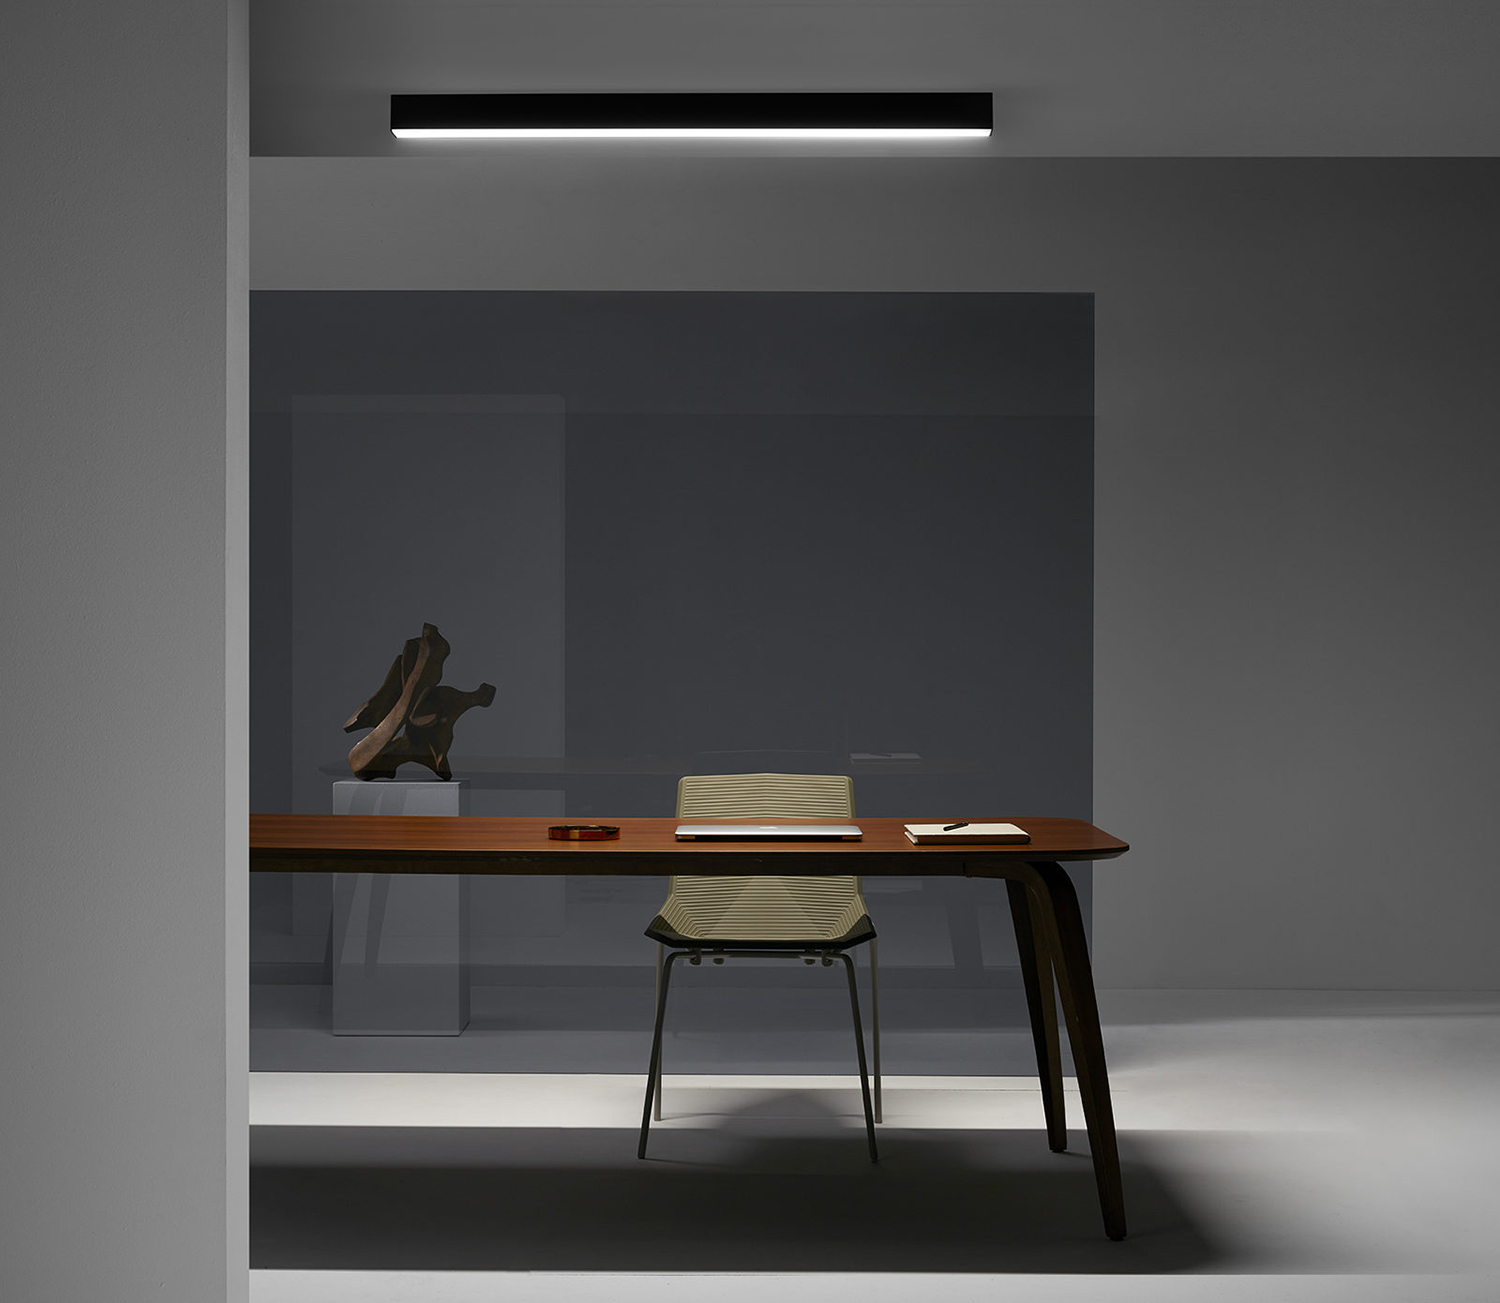 Art direction by Spanish studio Folch for Fluvia, a range of adaptable lighting solutions from LED Simon